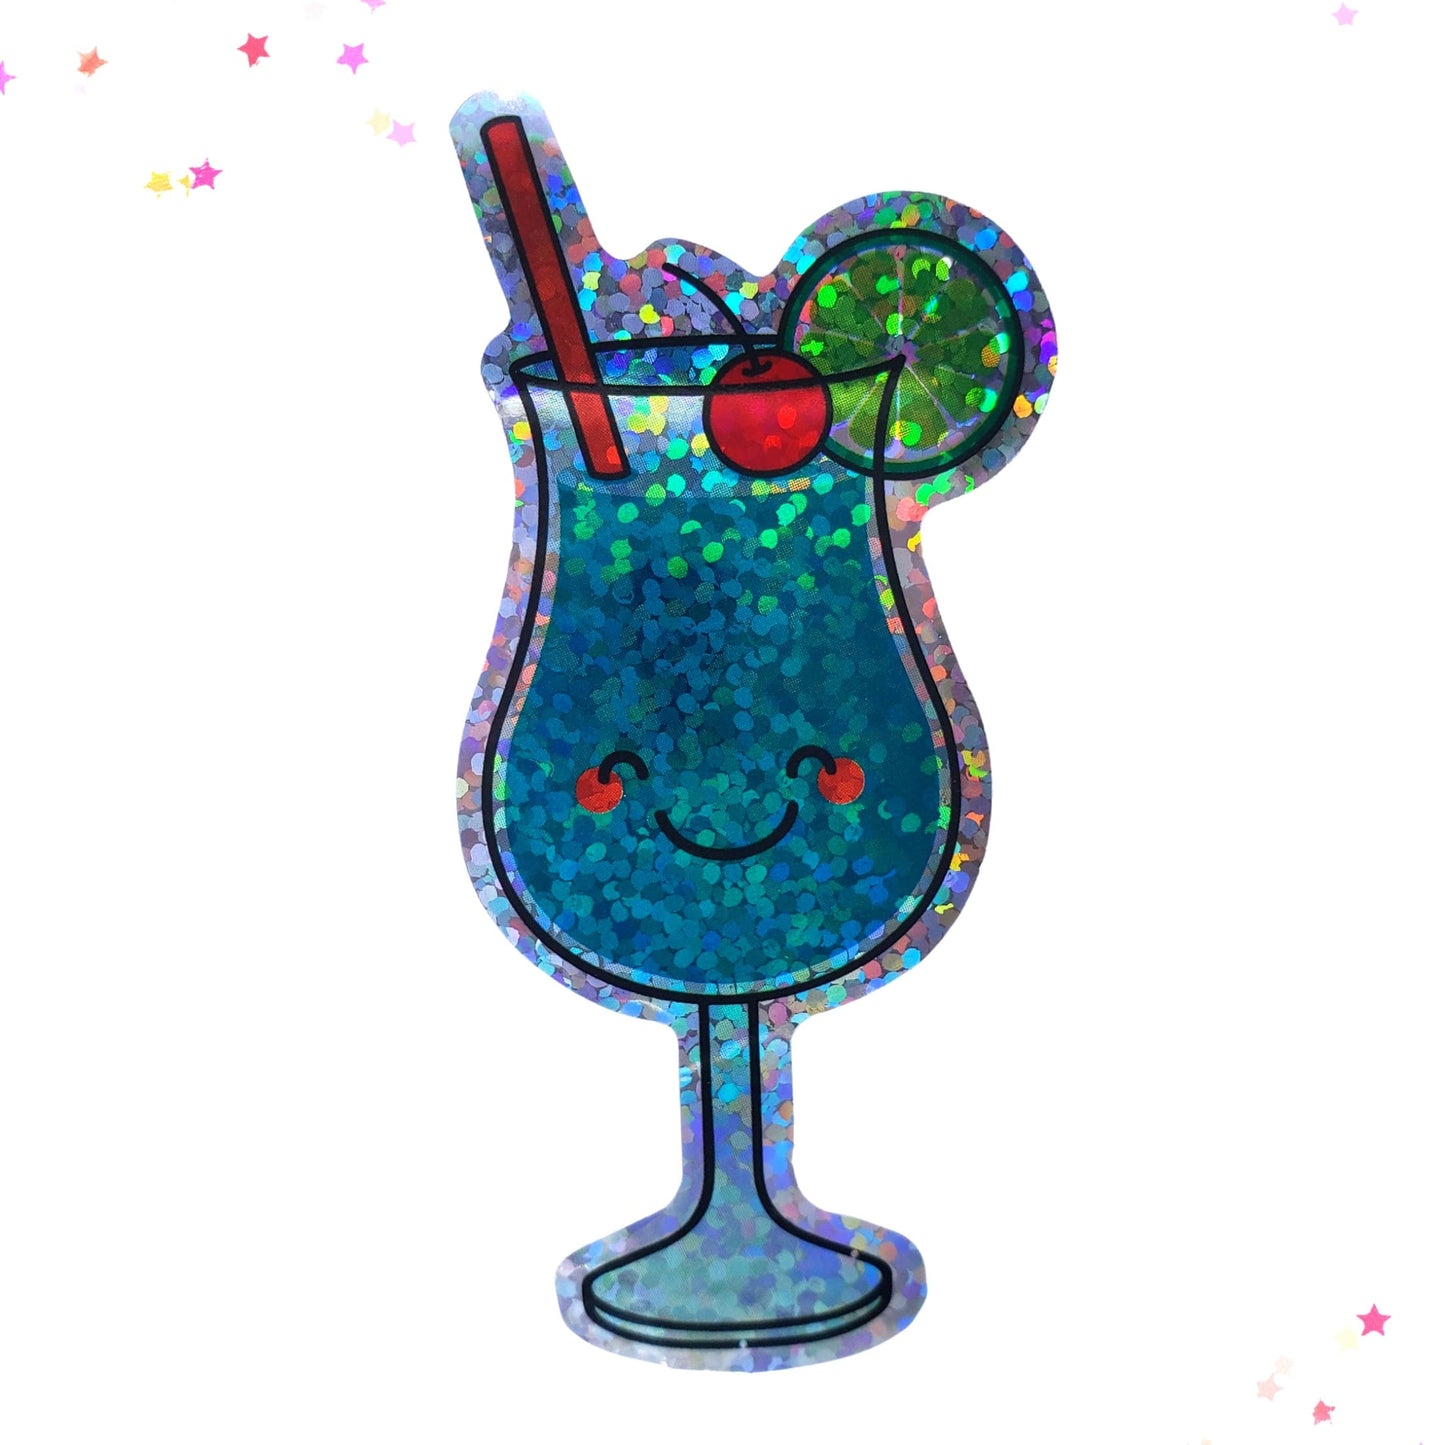 Premium Sticker - Sparkly Holographic Glitter Blue Drink from Confetti Kitty, Only 2.00